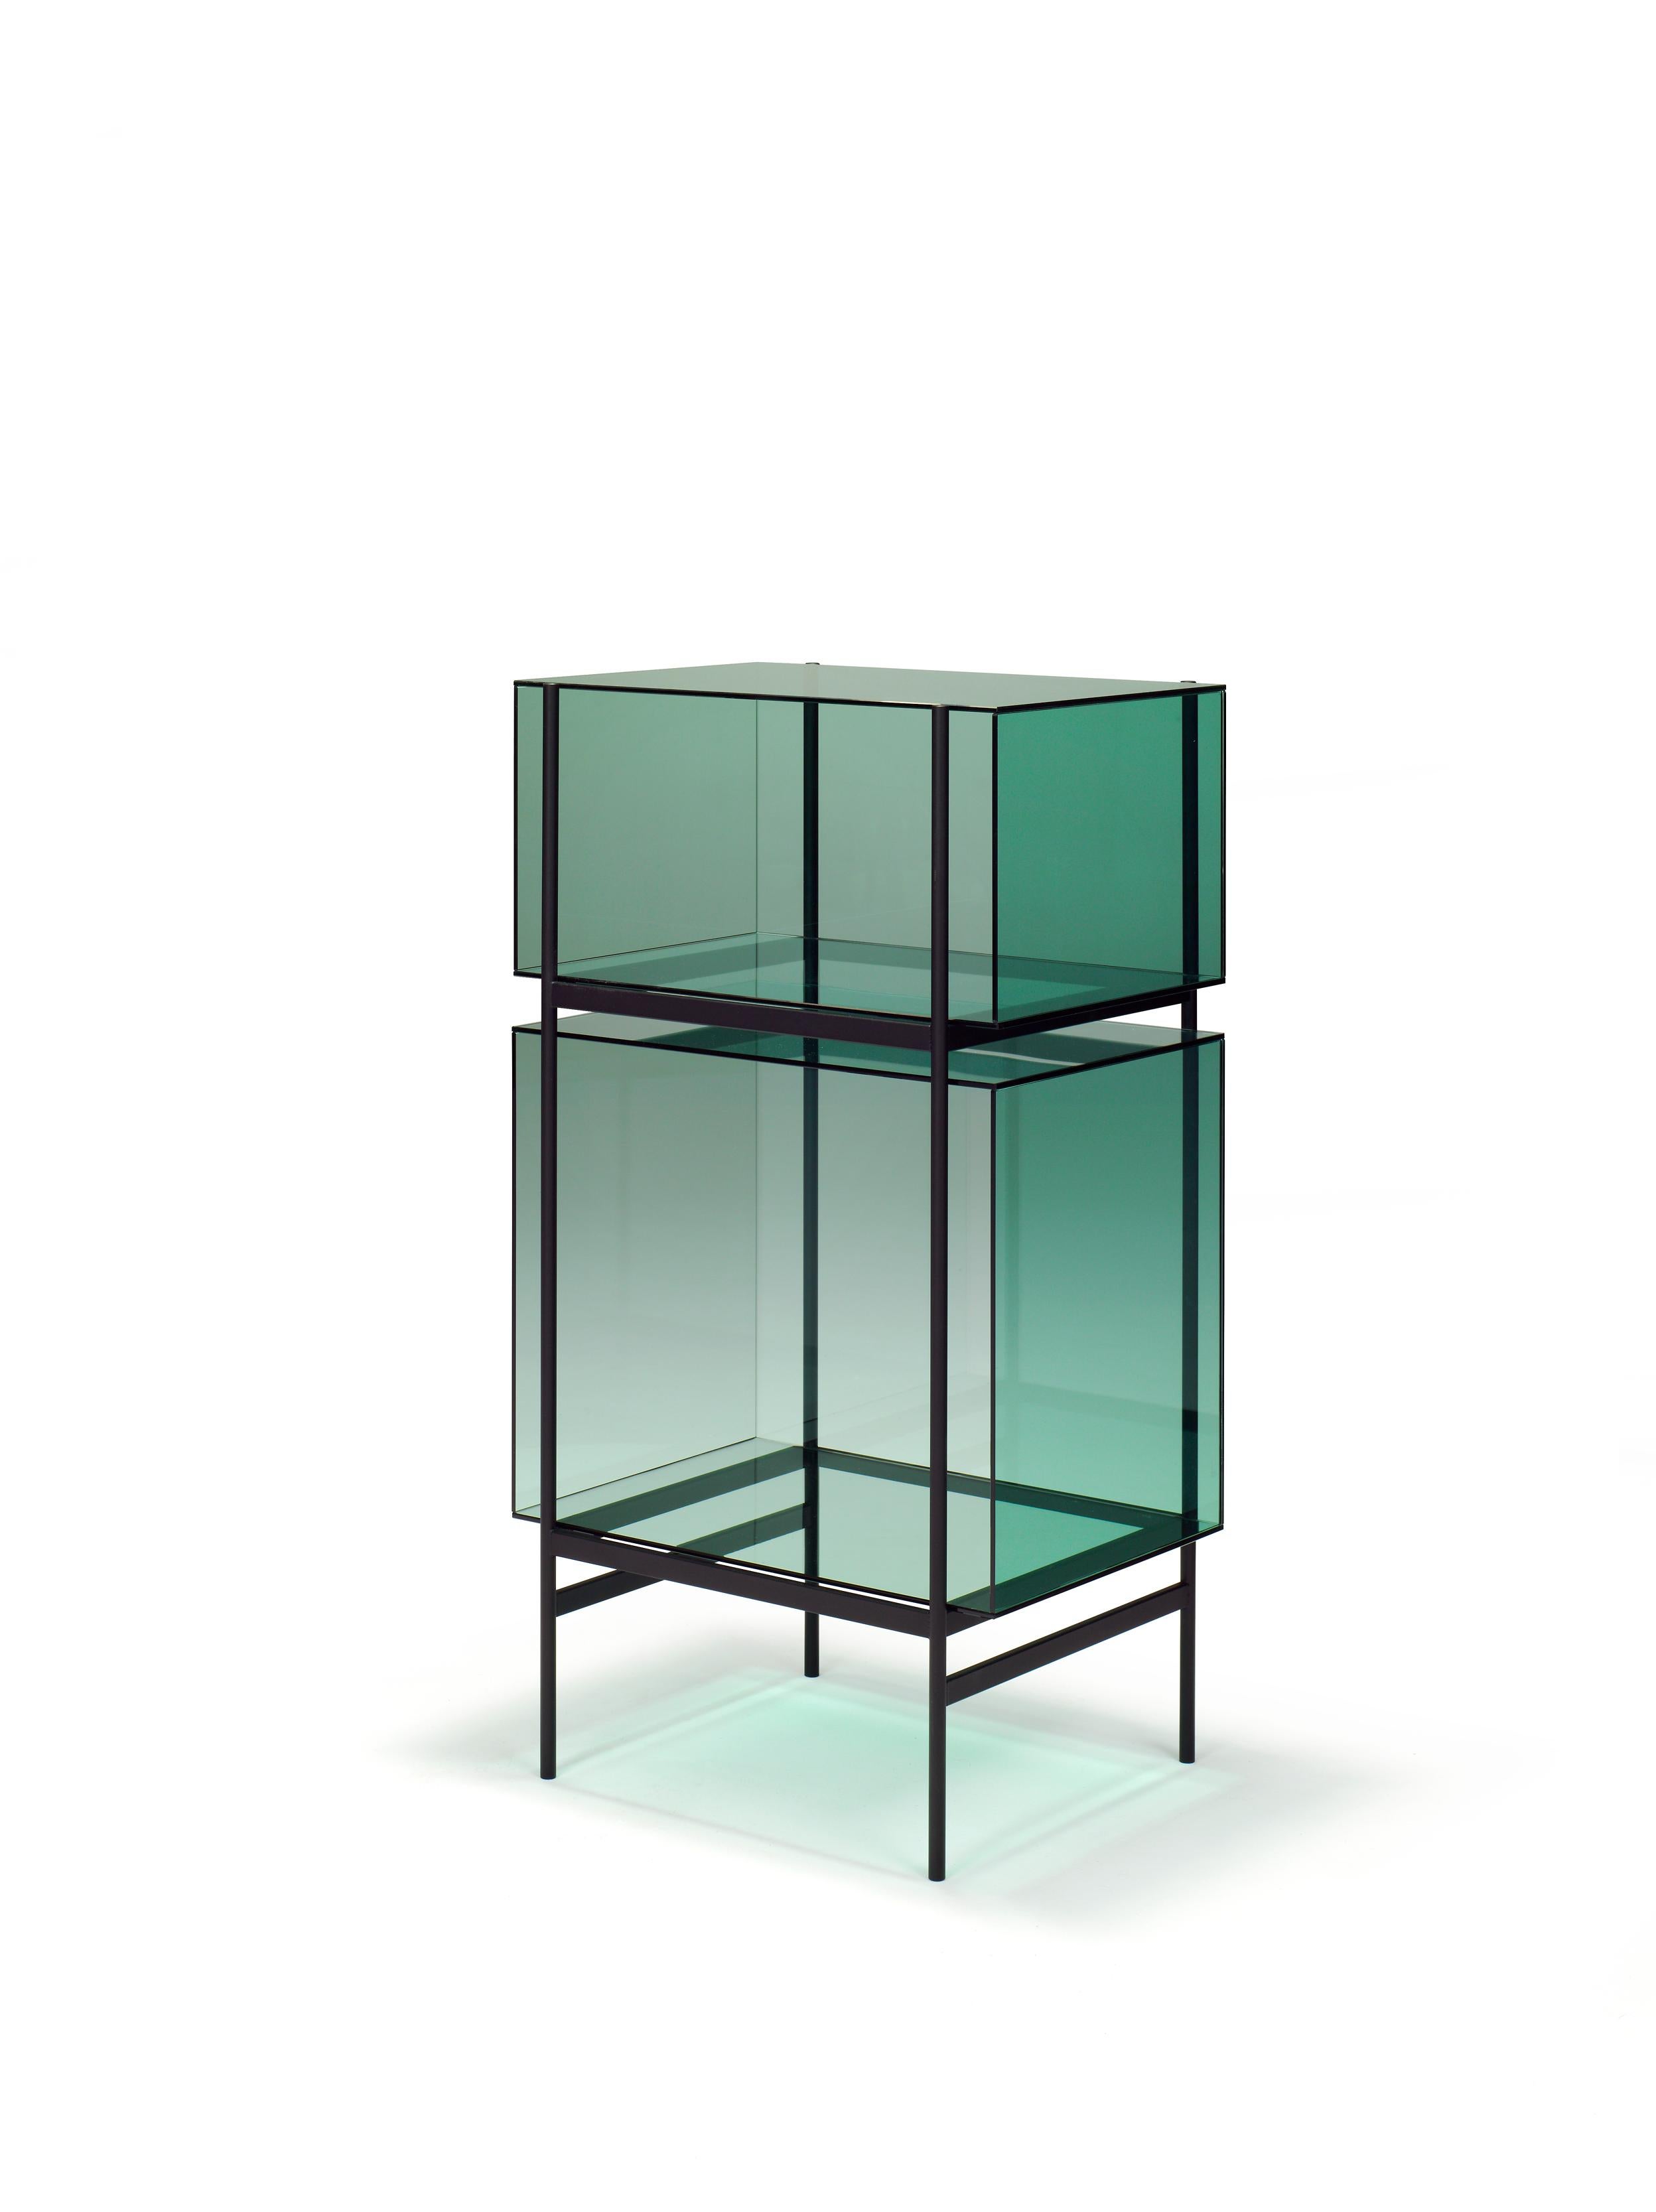 Lyn small green black cabinet by Pulpo
Dimensions: D60 x W45 x H110 cm
Materials: glass; powder coated steel

Also available in different colors. 

Studio Visser & Meijwaard describe their conception of lyn as a “graphic interplay between